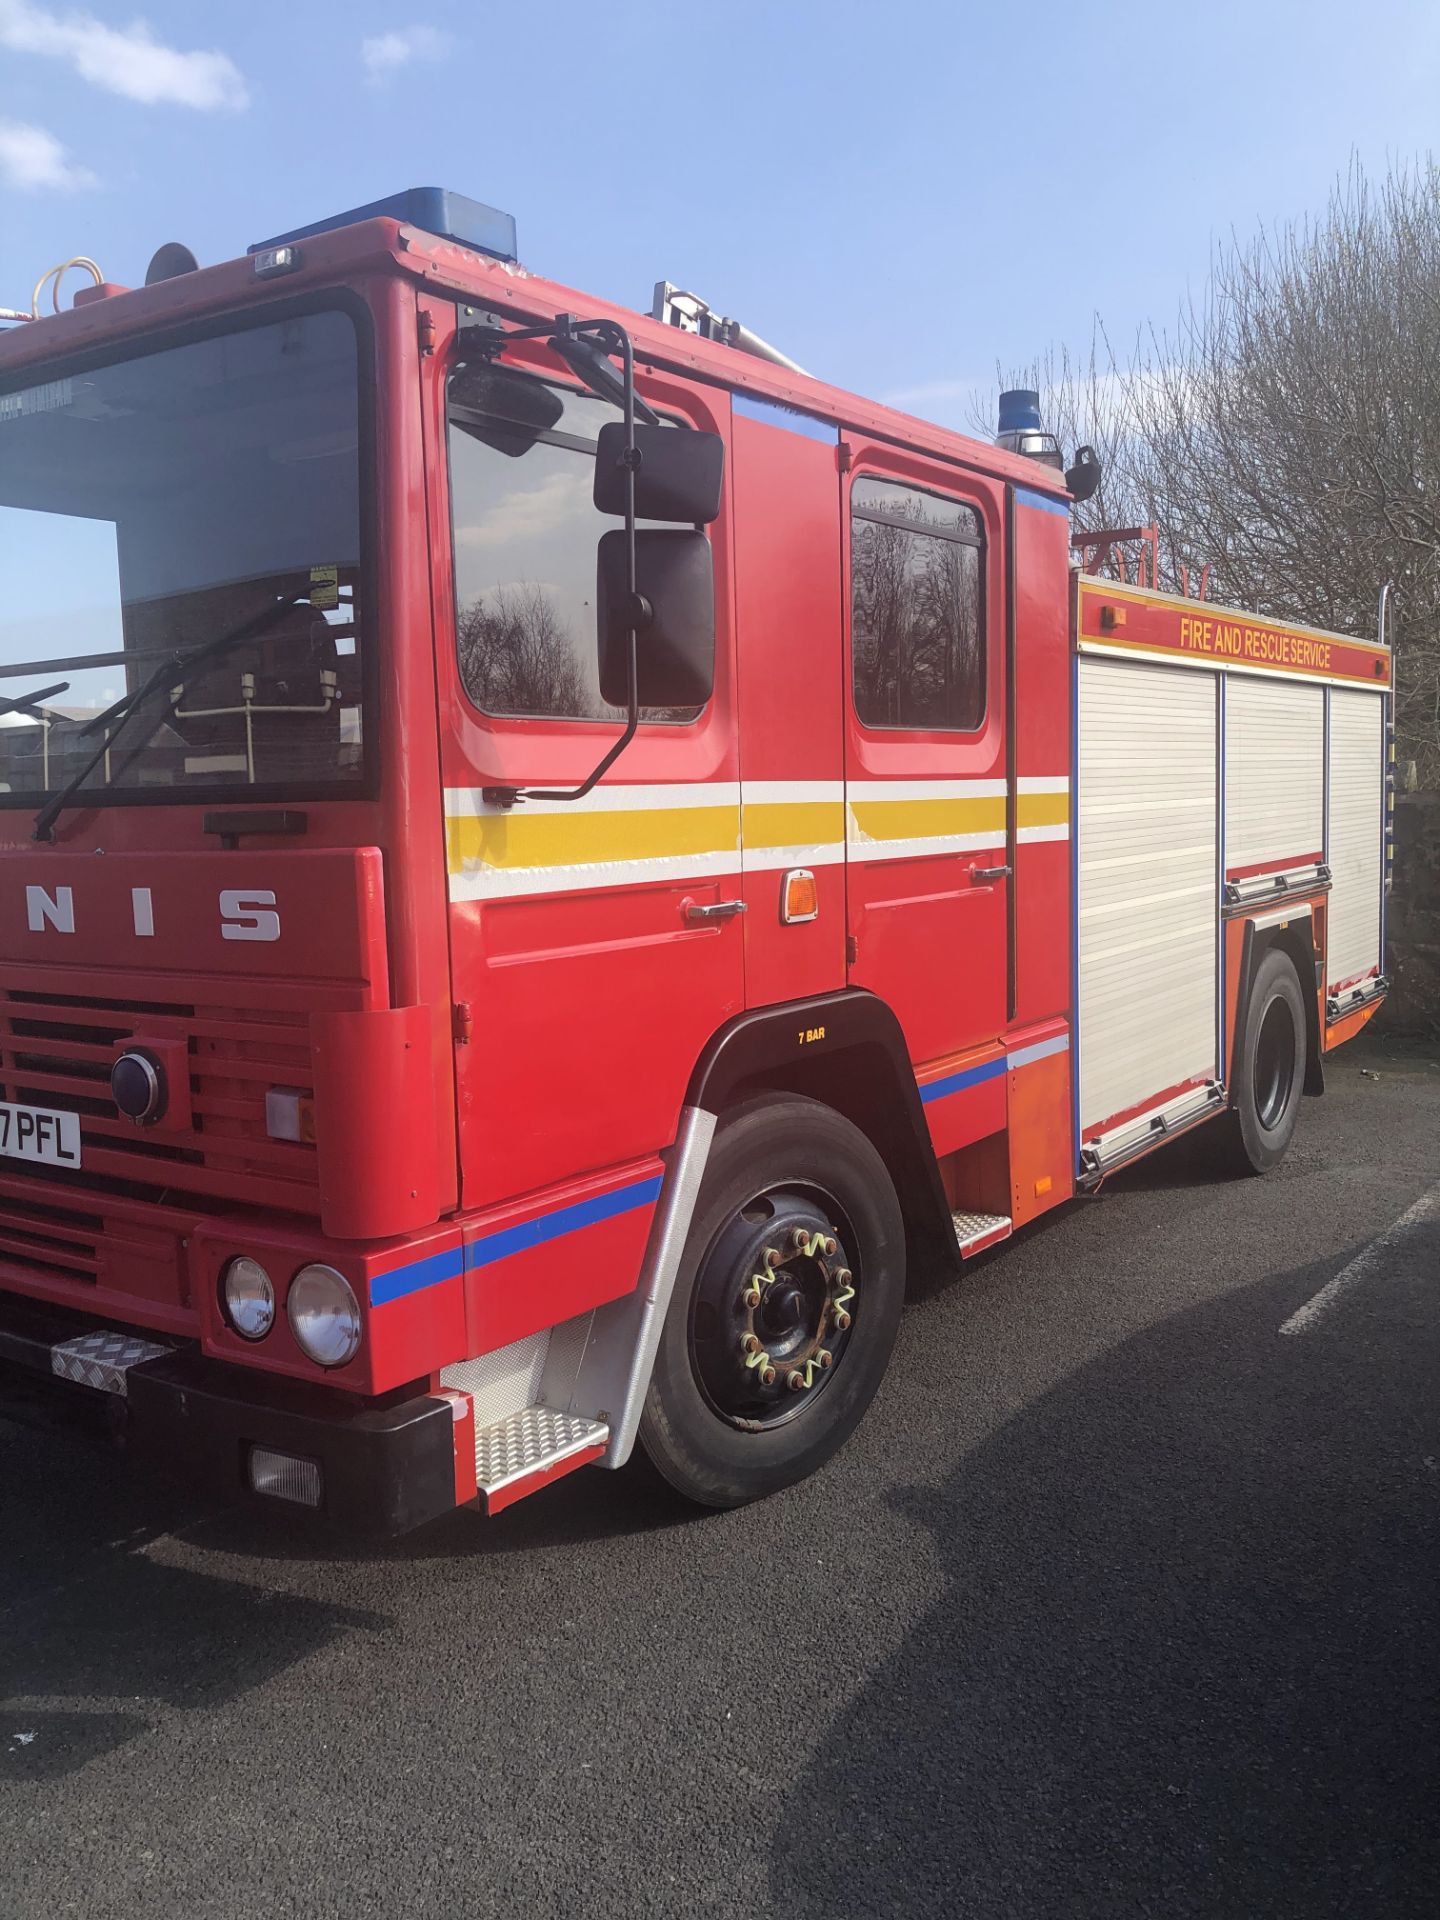 DENNIS FIRE ENGINE TRUCK - RESERVE LOWERED!!! PRICED TO CLEAR